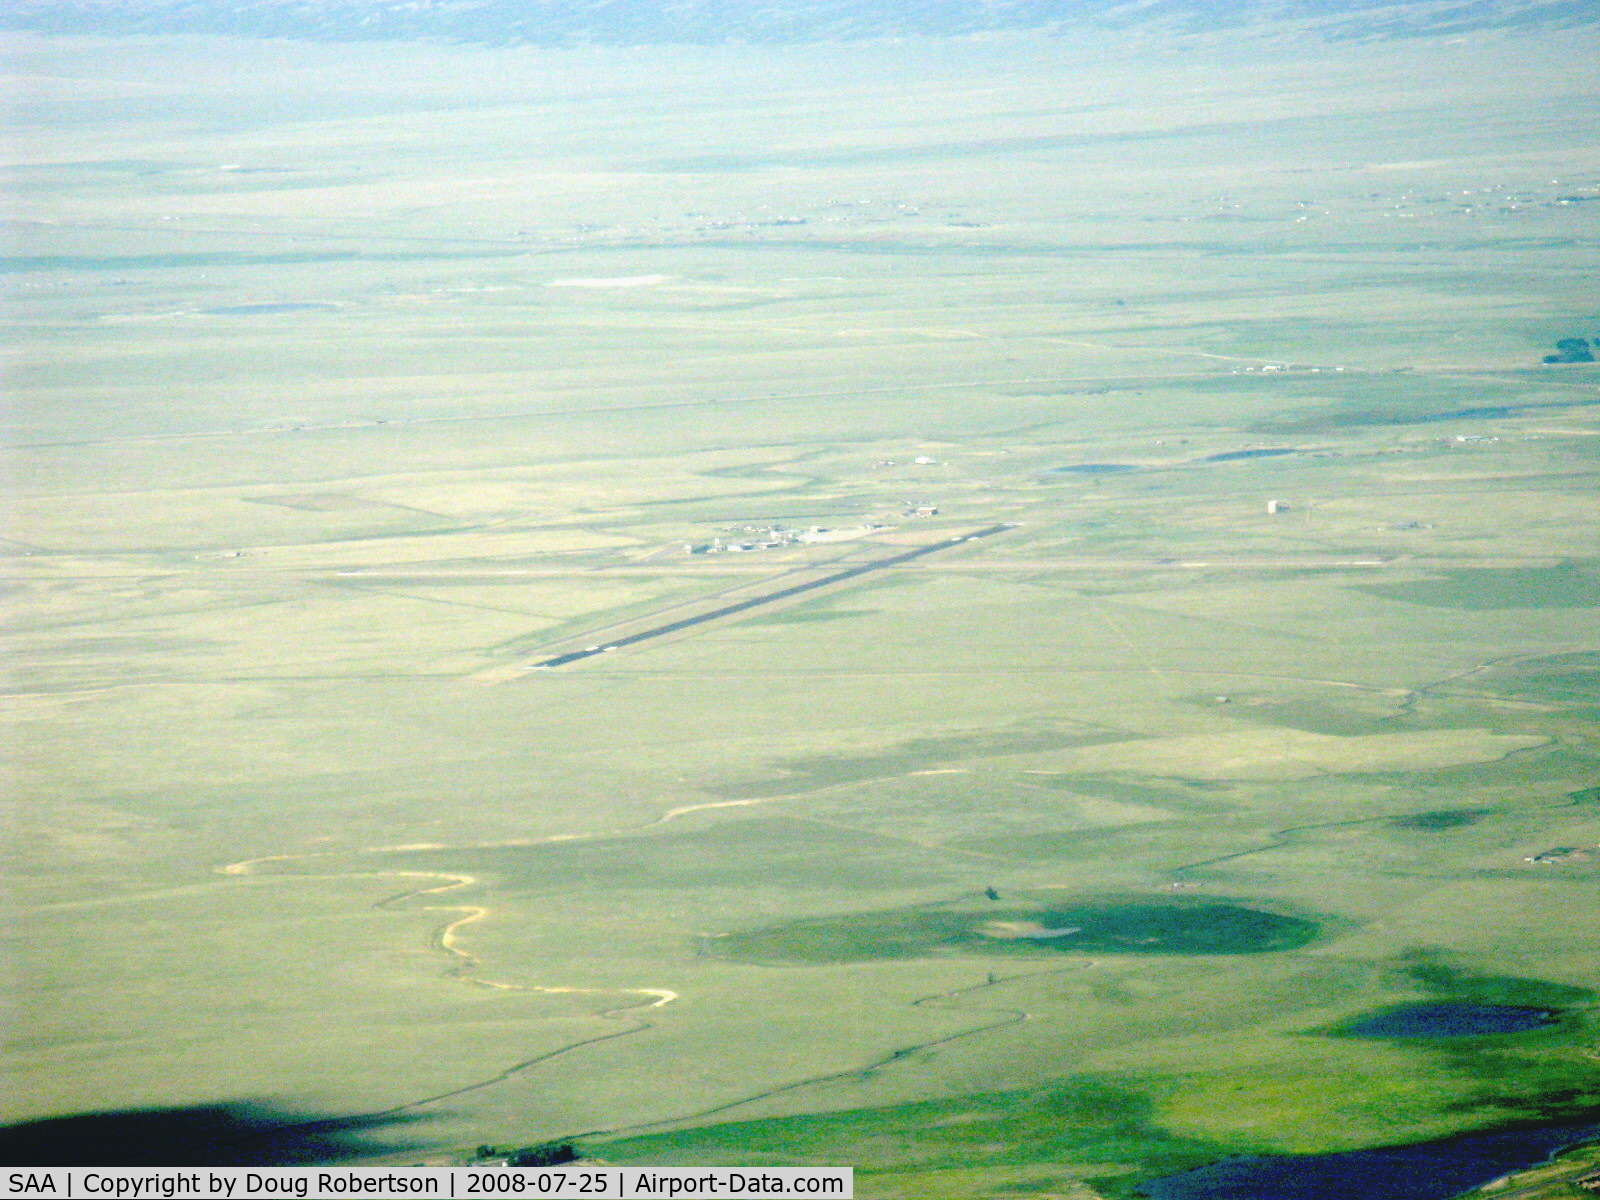 Shively Field Airport (SAA) - Saratoga, WY Shively Field from 11,500' msl